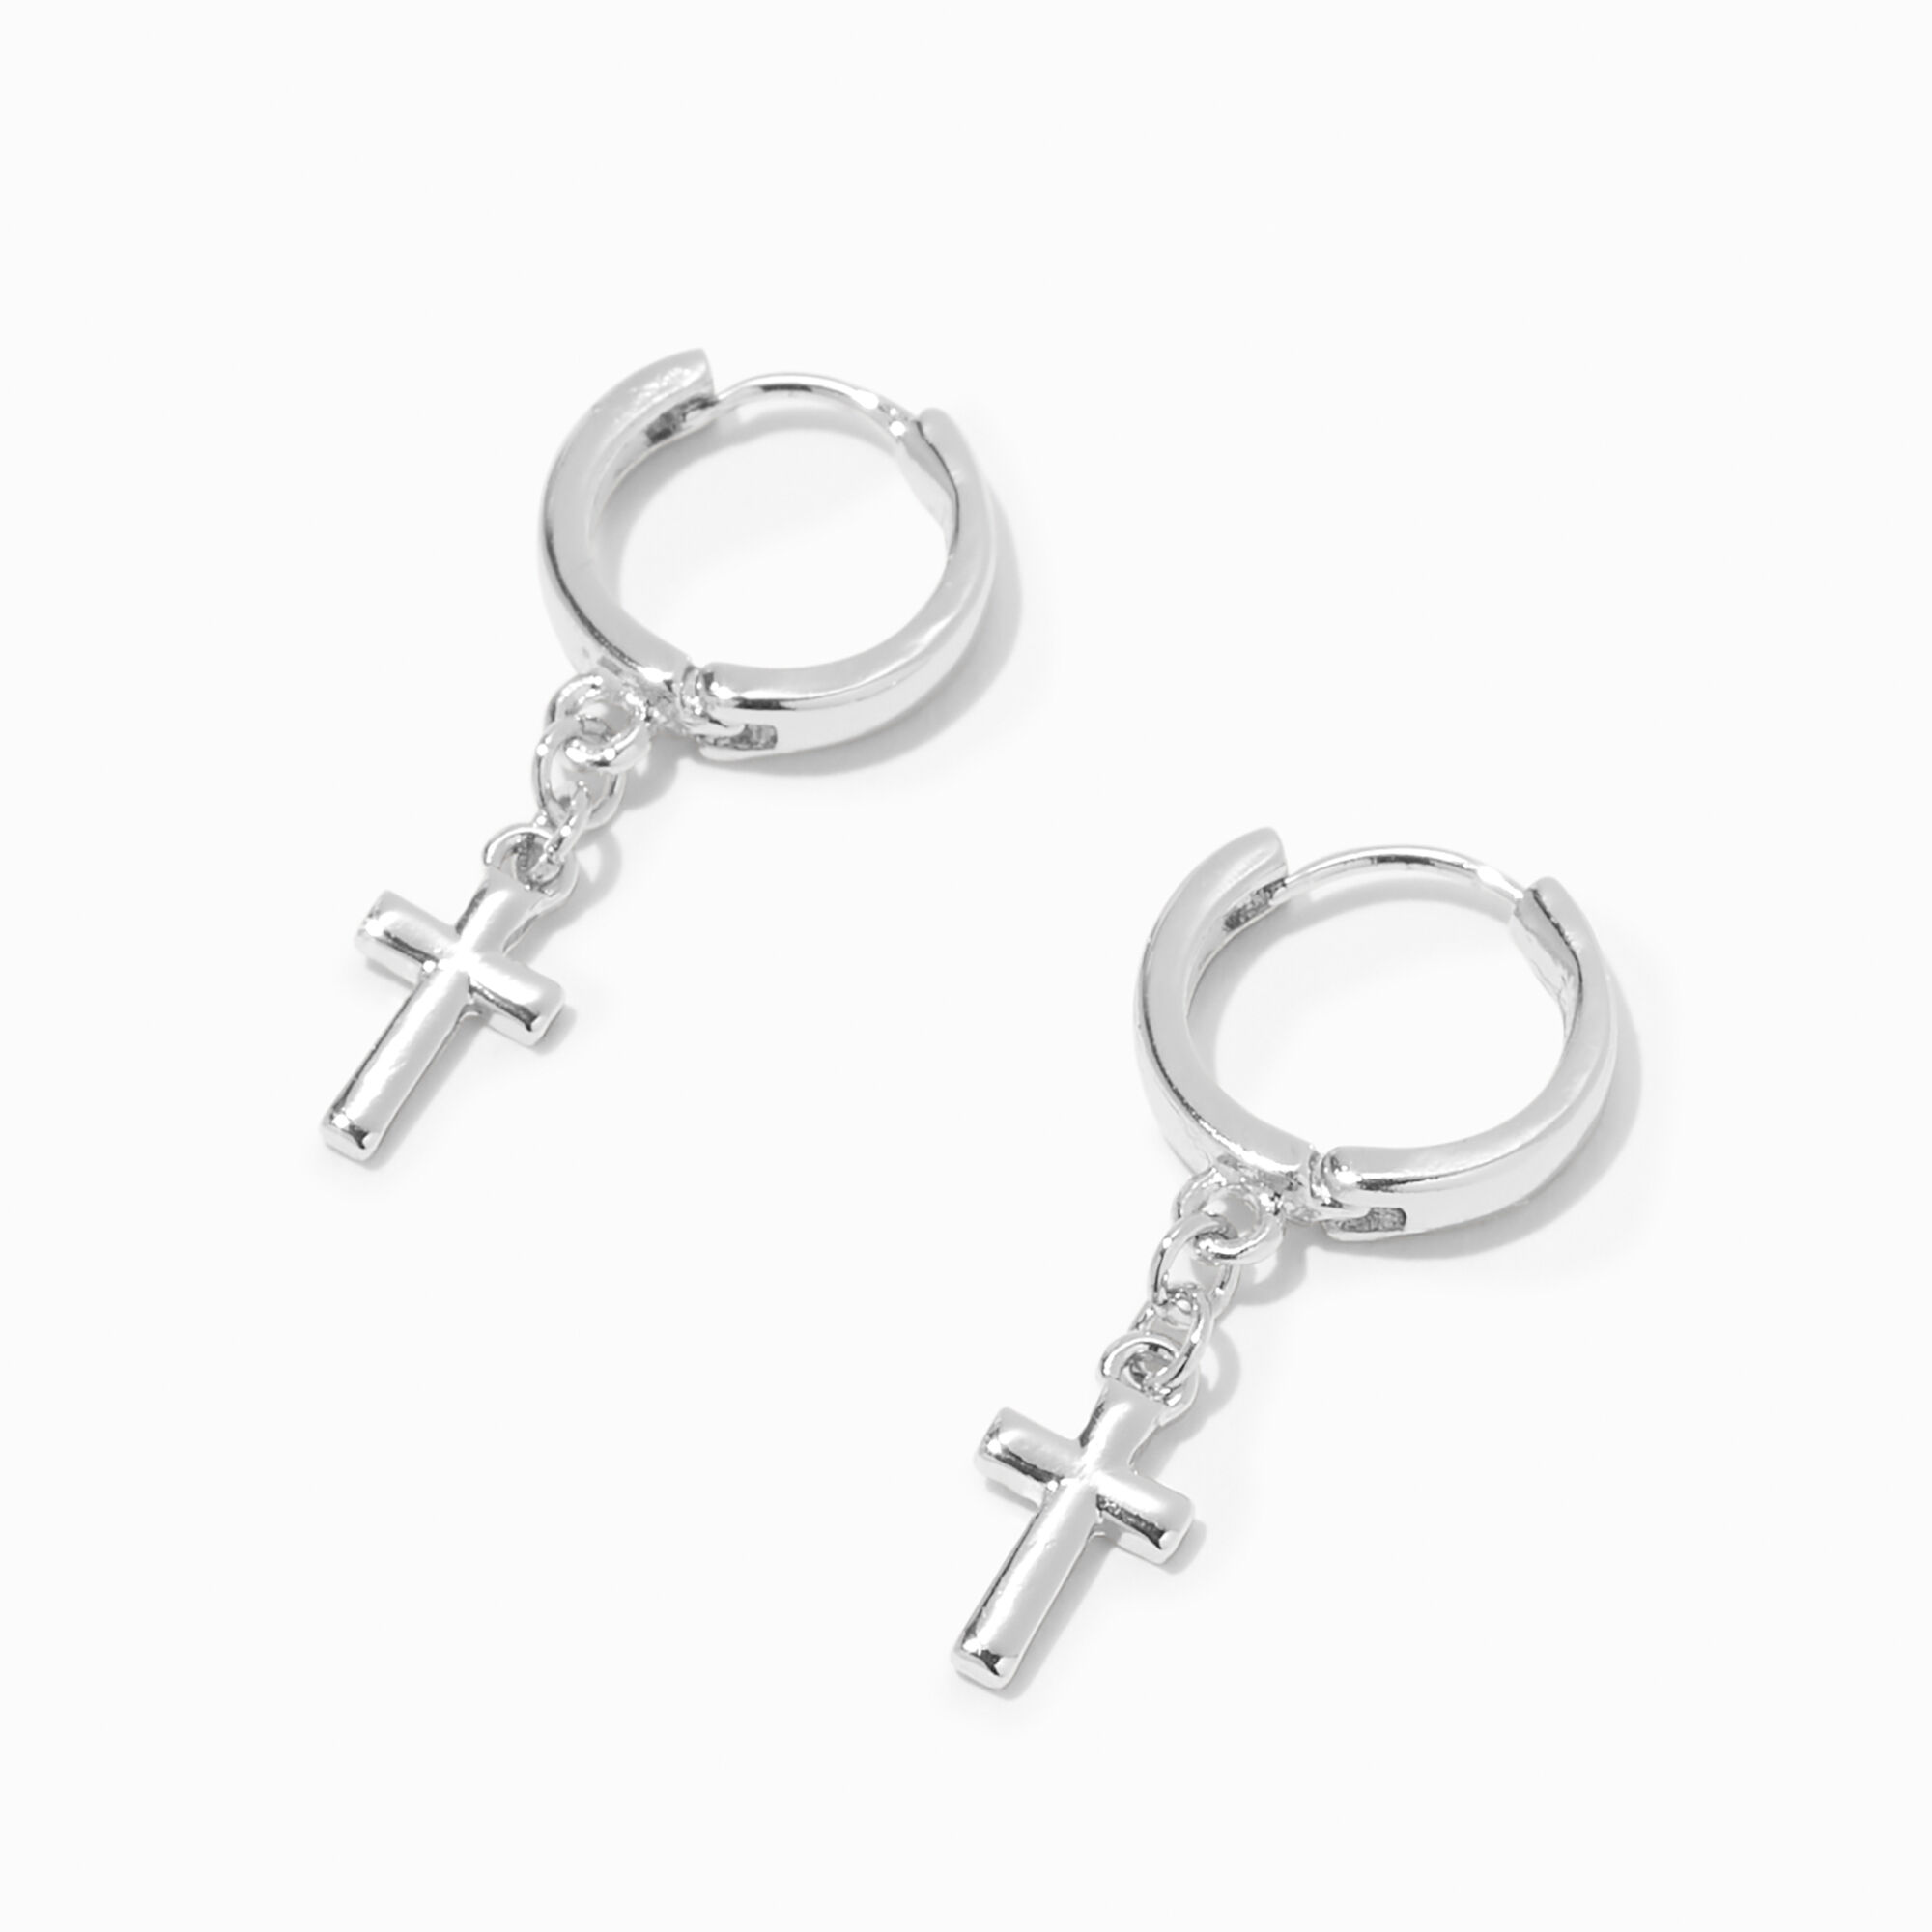 View Claires Recycled Jewelry Tone Cross 10MM Huggie Hoop Earrings Silver information